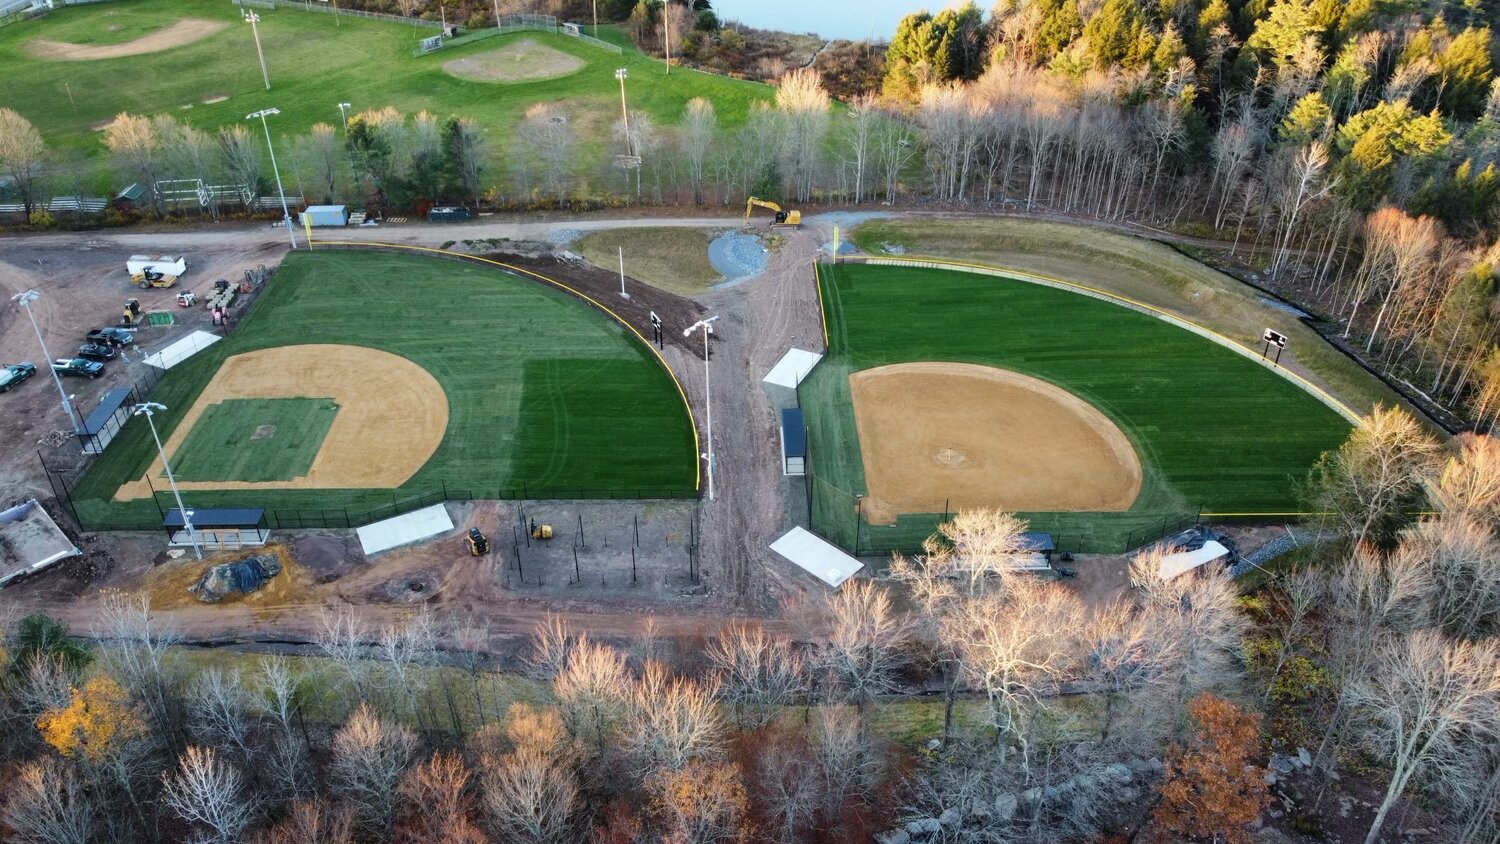 New sod and the infields have been installed recently at the Catskill Mountain Little League’s new complex on league-owned property adjacent to Archibald Field outside the village of Stamford.